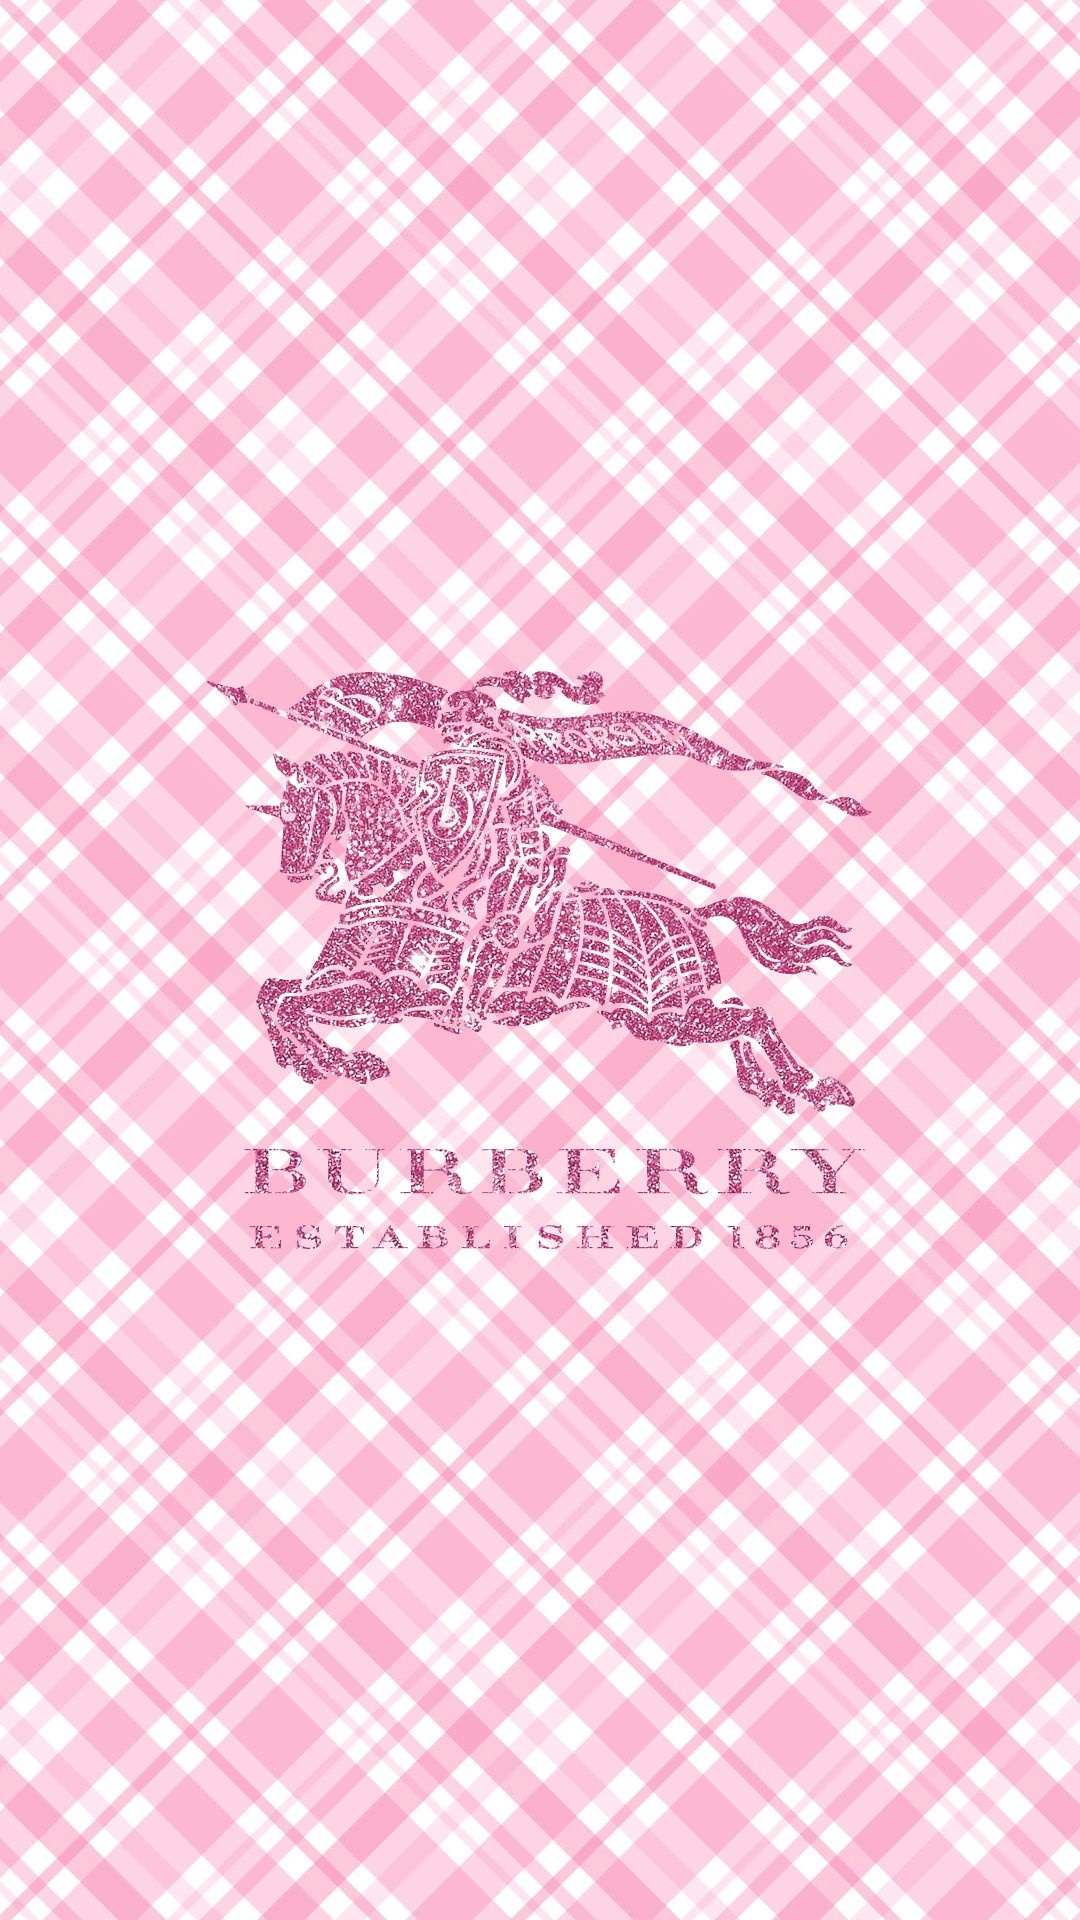 Burberry: Variations of the iconic tartan, A world-class luxury brand. 1080x1920 Full HD Background.